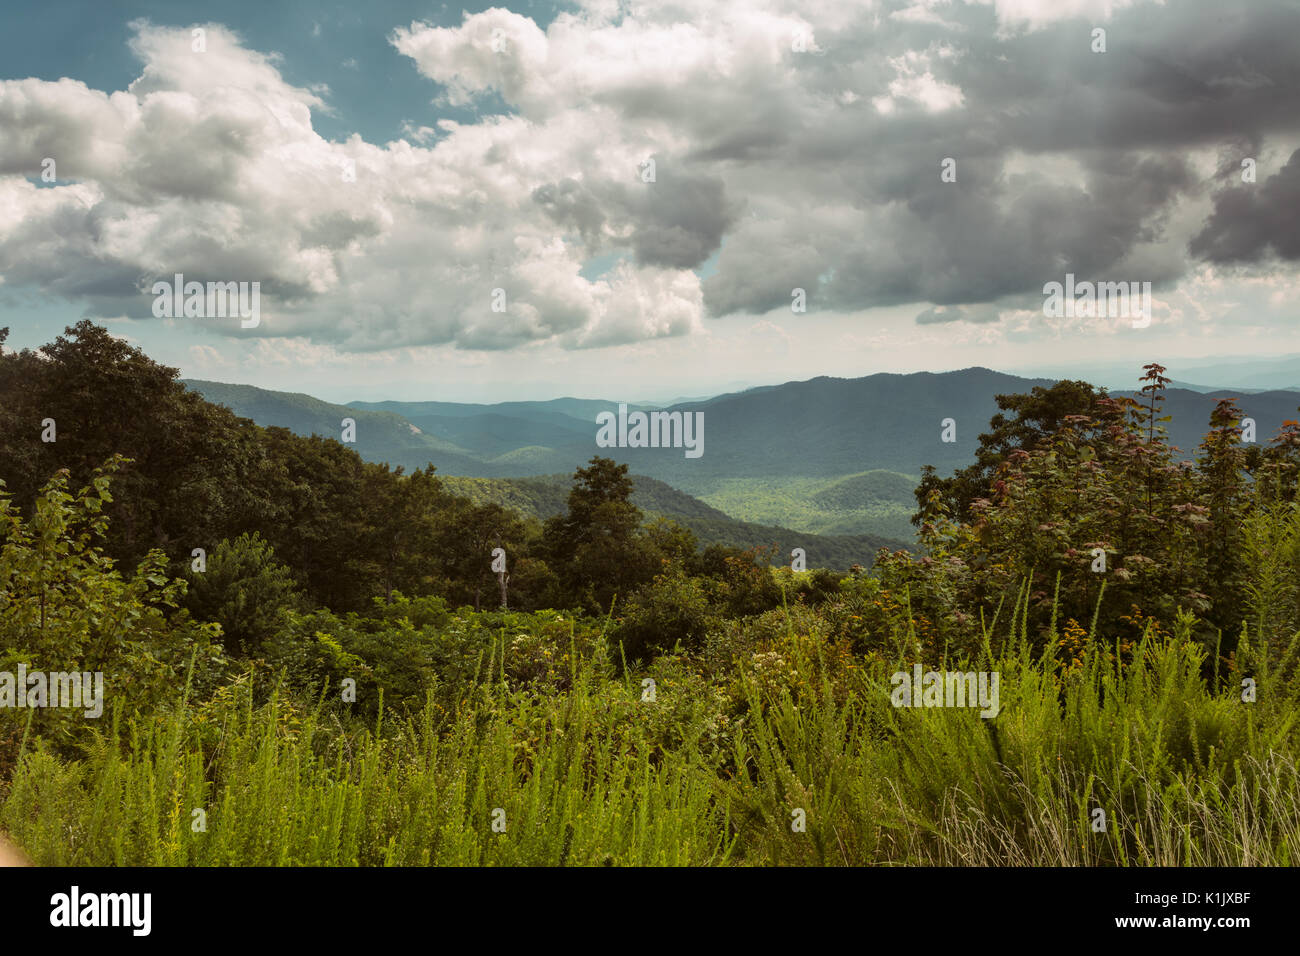 One of the many areas along the Blue Ridge Parkway where people can stop and gaze at the beautiful scenery of the Smokey Mountains. Stock Photo